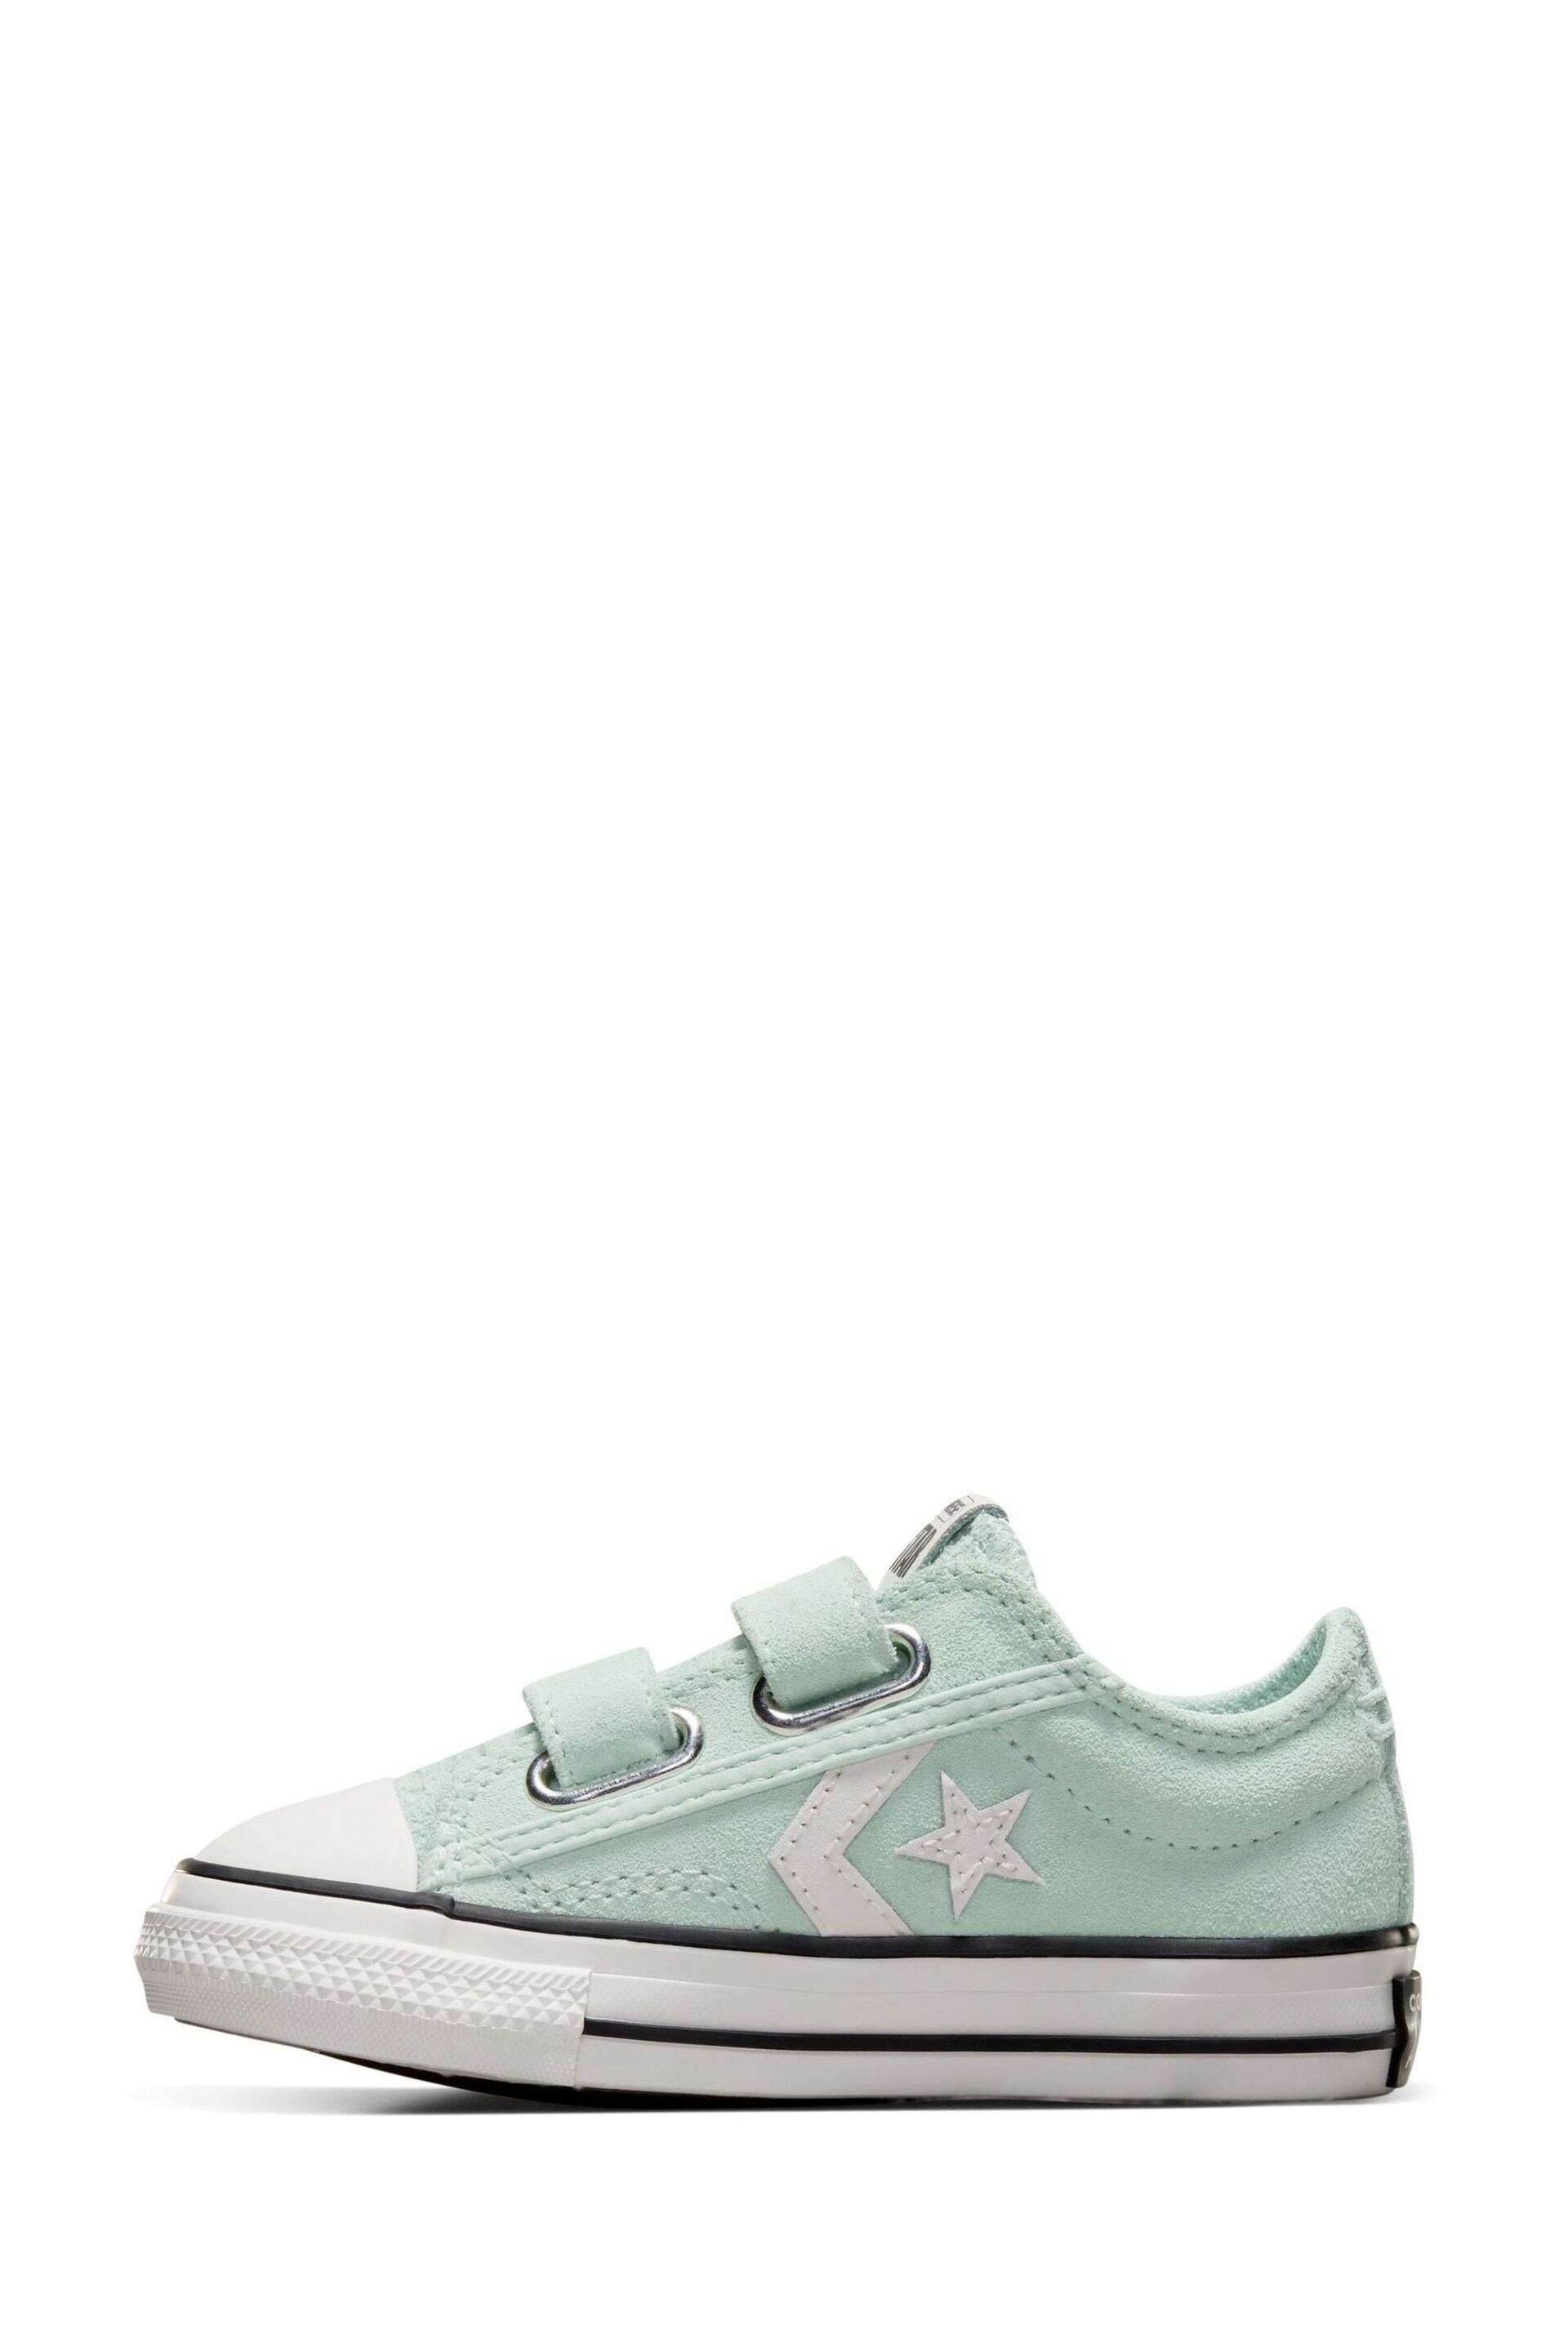 Converse Green Star Player 76 2V Ox Trainers - Image 5 of 9